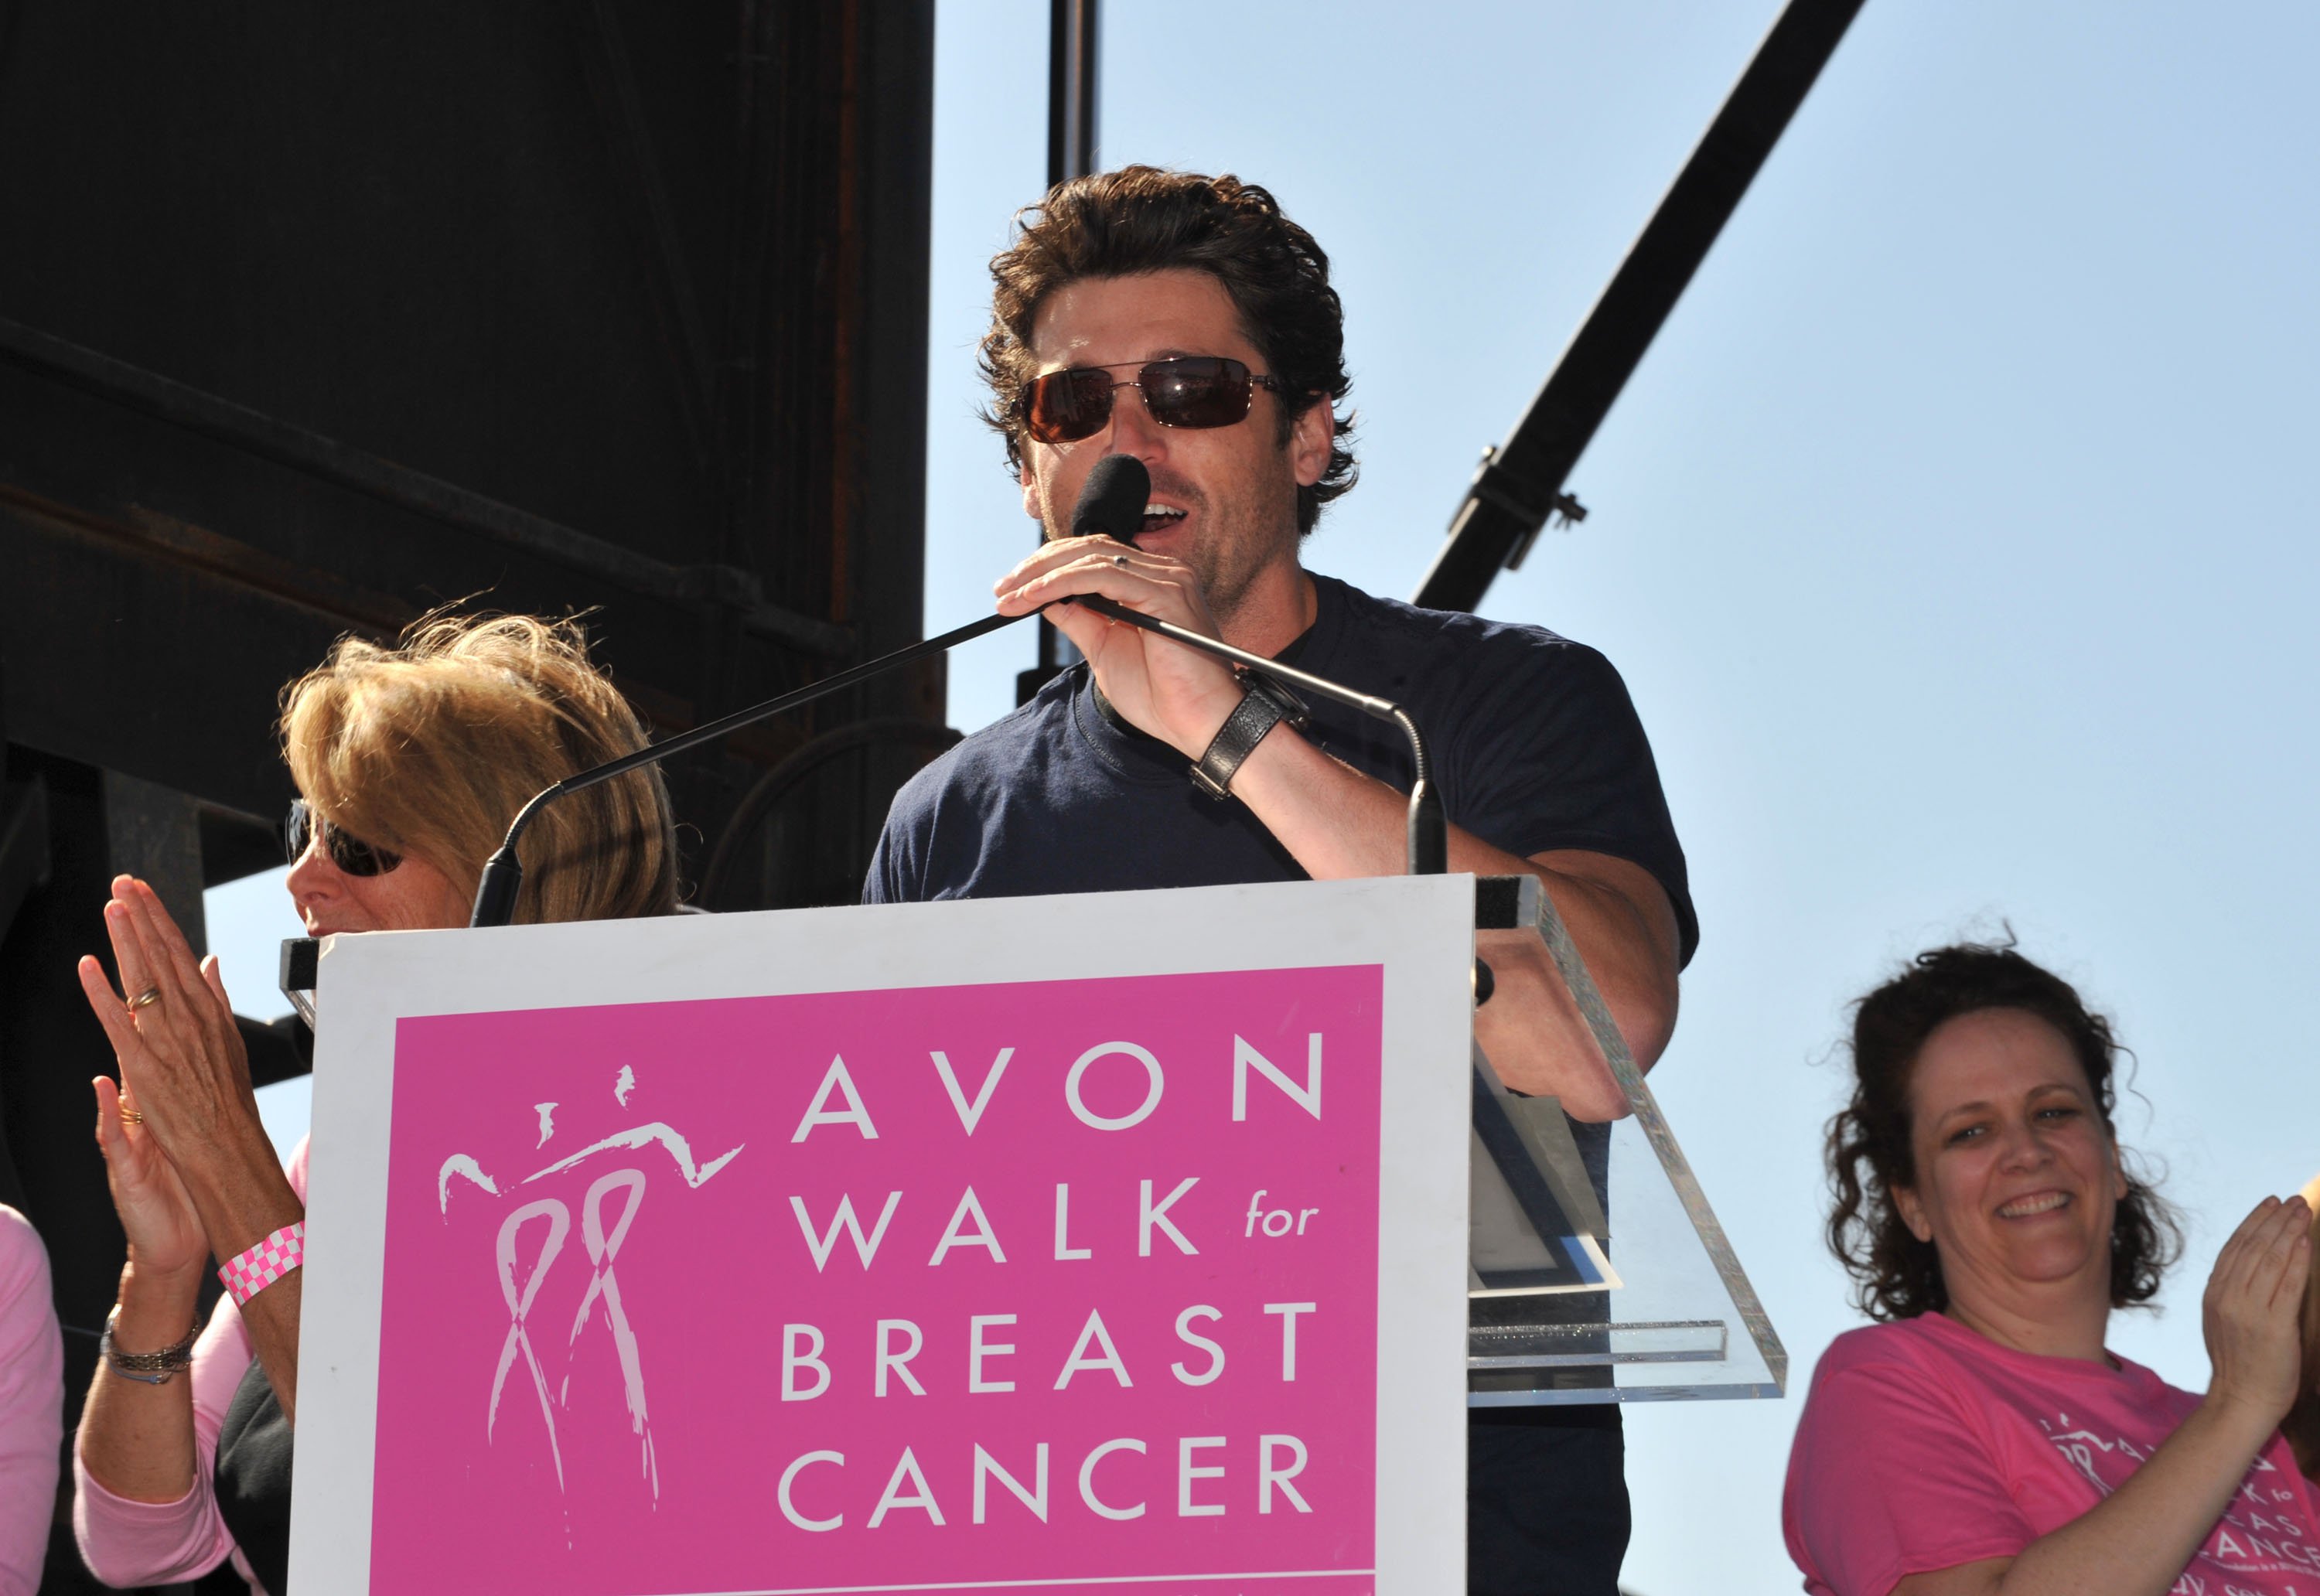 Patrick Dempsey at the Queen Mary Events Park on September 13, 2009 in Long Beach, California | Source: Getty Images